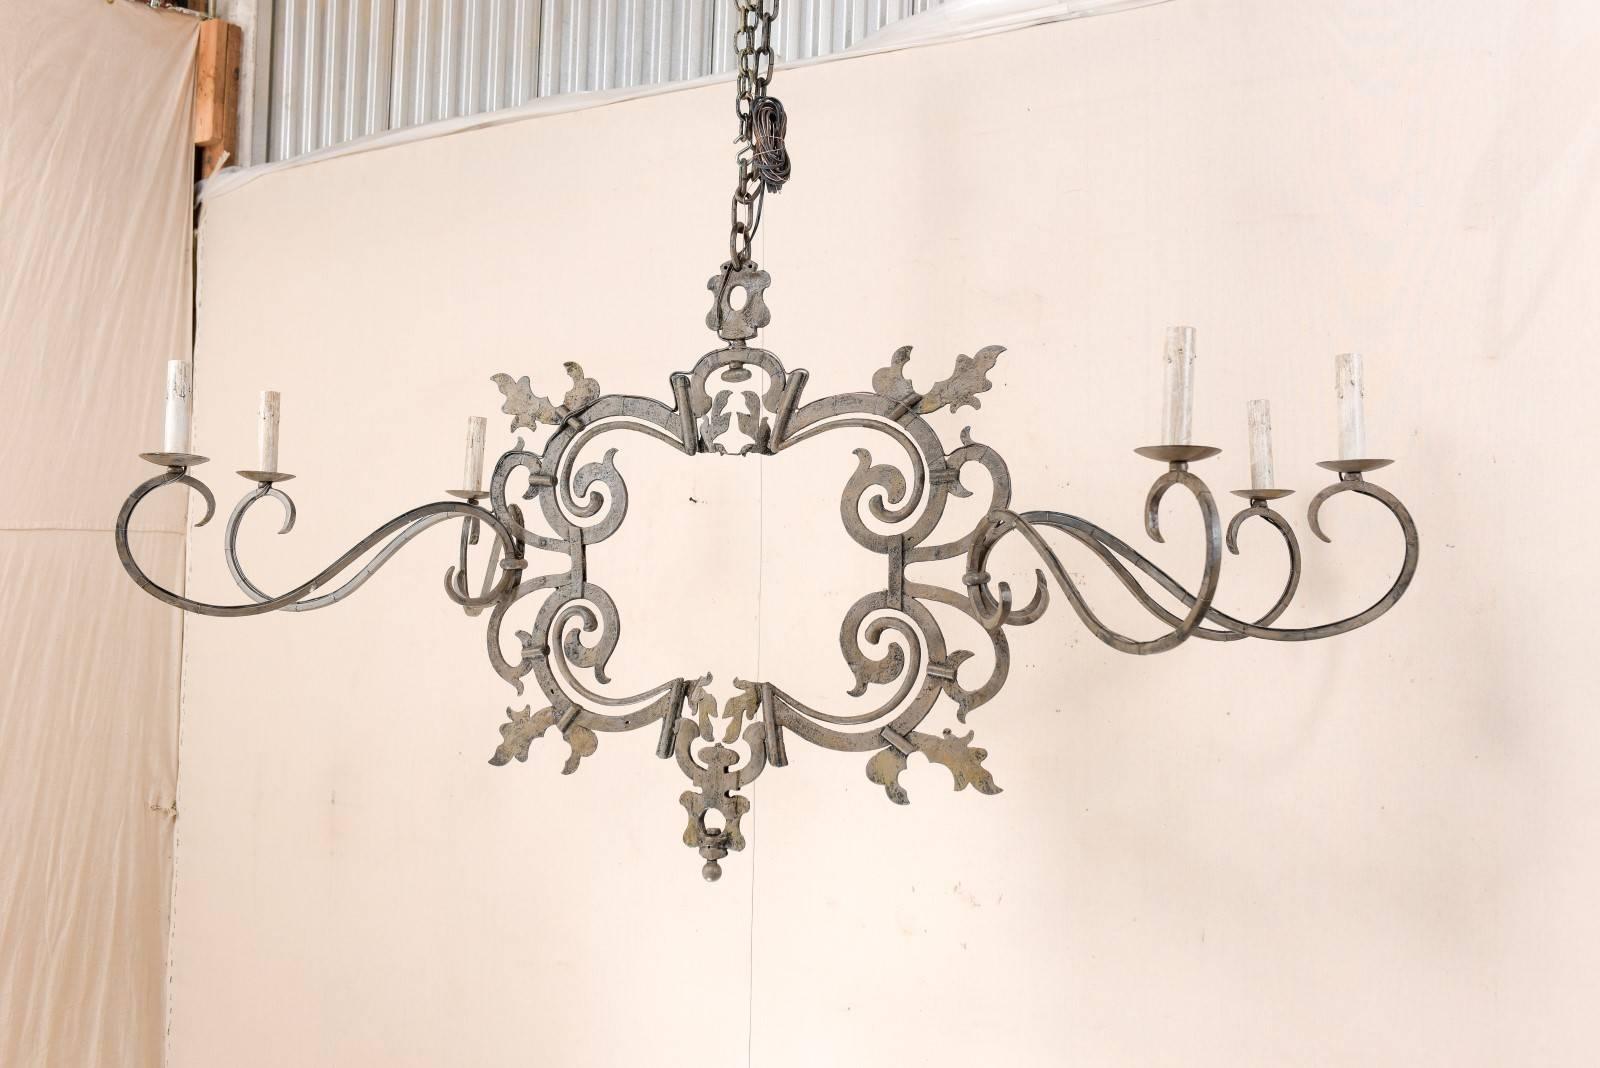 Large Italian Painted Iron Chandelier with 18th Century Scrolling Iron Work 4